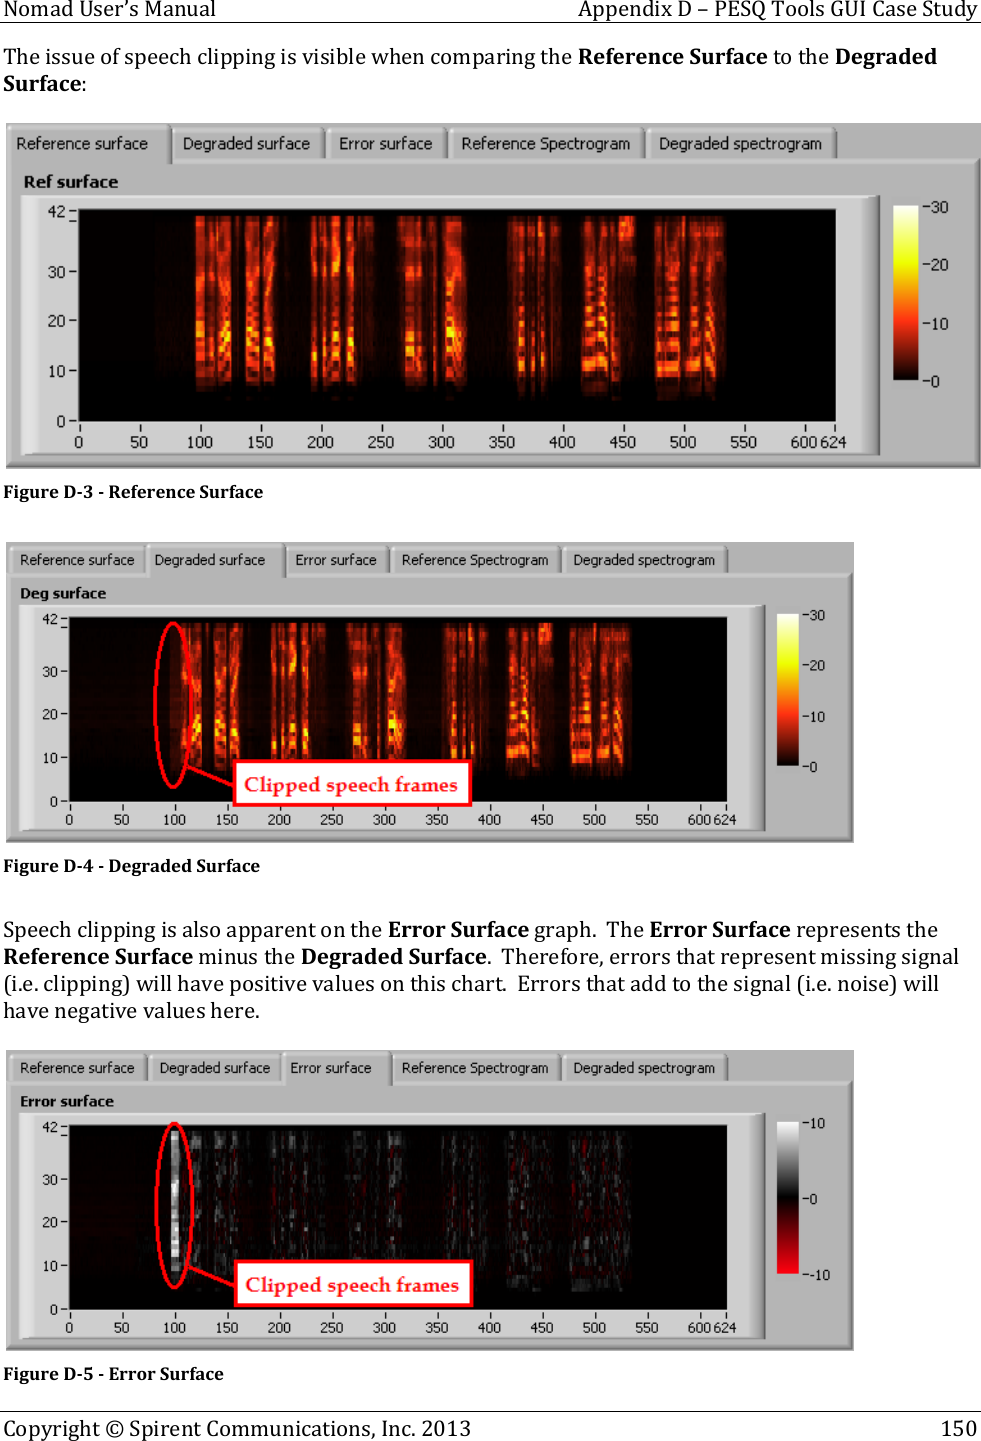  Nomad User’s Manual  Appendix D – PESQ Tools GUI Case Study Copyright © Spirent Communications, Inc. 2013    150  The issue of speech clipping is visible when comparing the Reference Surface to the Degraded Surface:   Figure D-3 - Reference Surface   Figure D-4 - Degraded Surface  Speech clipping is also apparent on the Error Surface graph.  The Error Surface represents the Reference Surface minus the Degraded Surface.  Therefore, errors that represent missing signal (i.e. clipping) will have positive values on this chart.  Errors that add to the signal (i.e. noise) will have negative values here.   Figure D-5 - Error Surface 